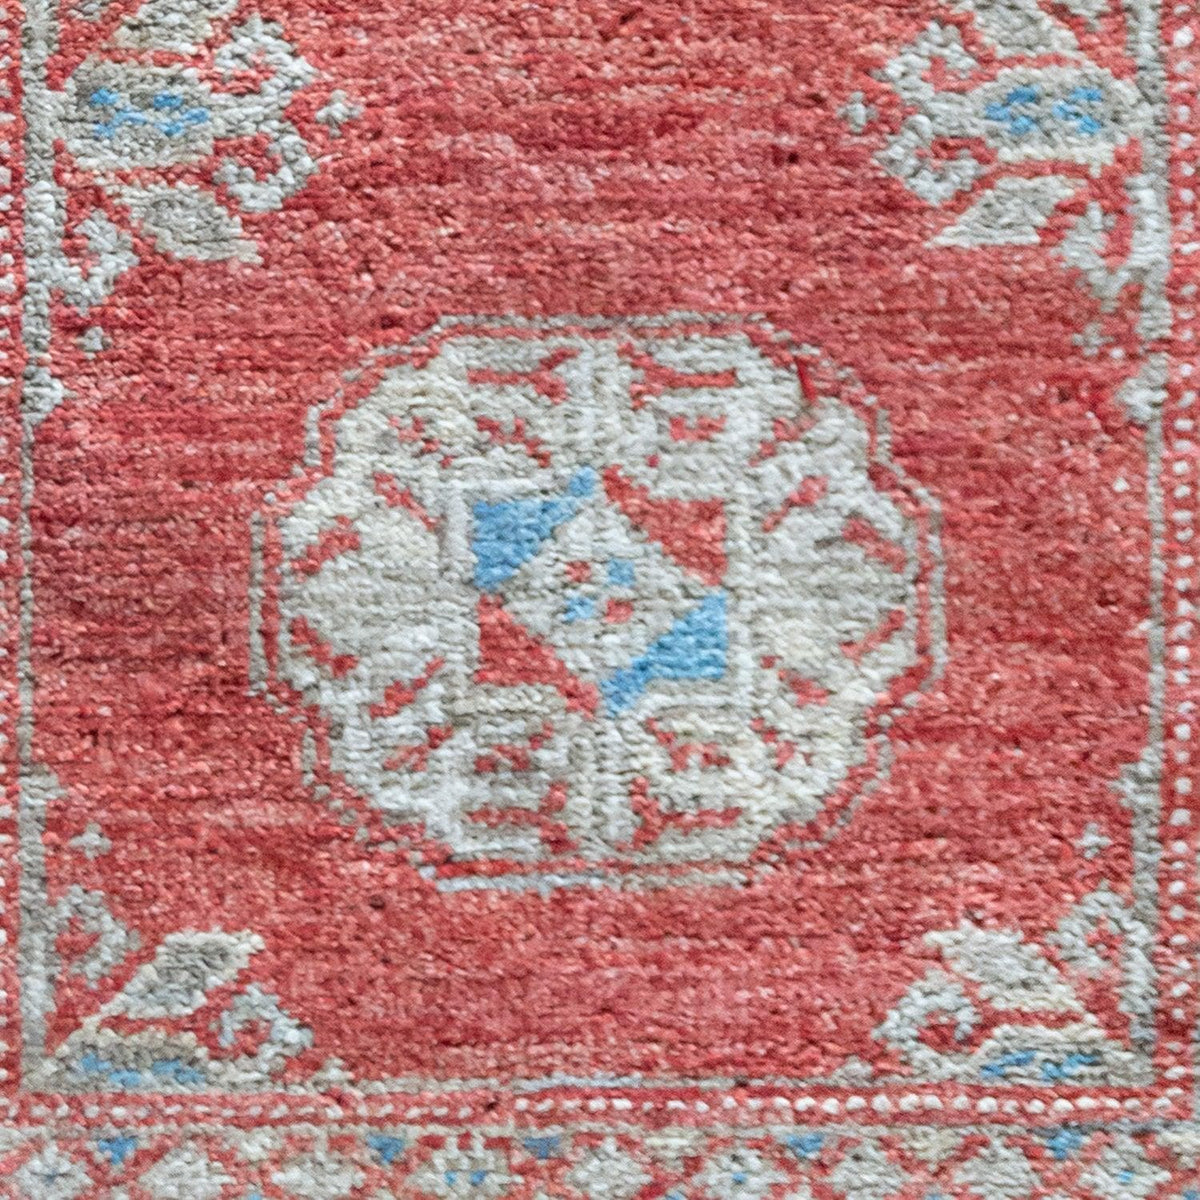 Fine Hand-knotted Small Tribal Rug 45cm x 60cm